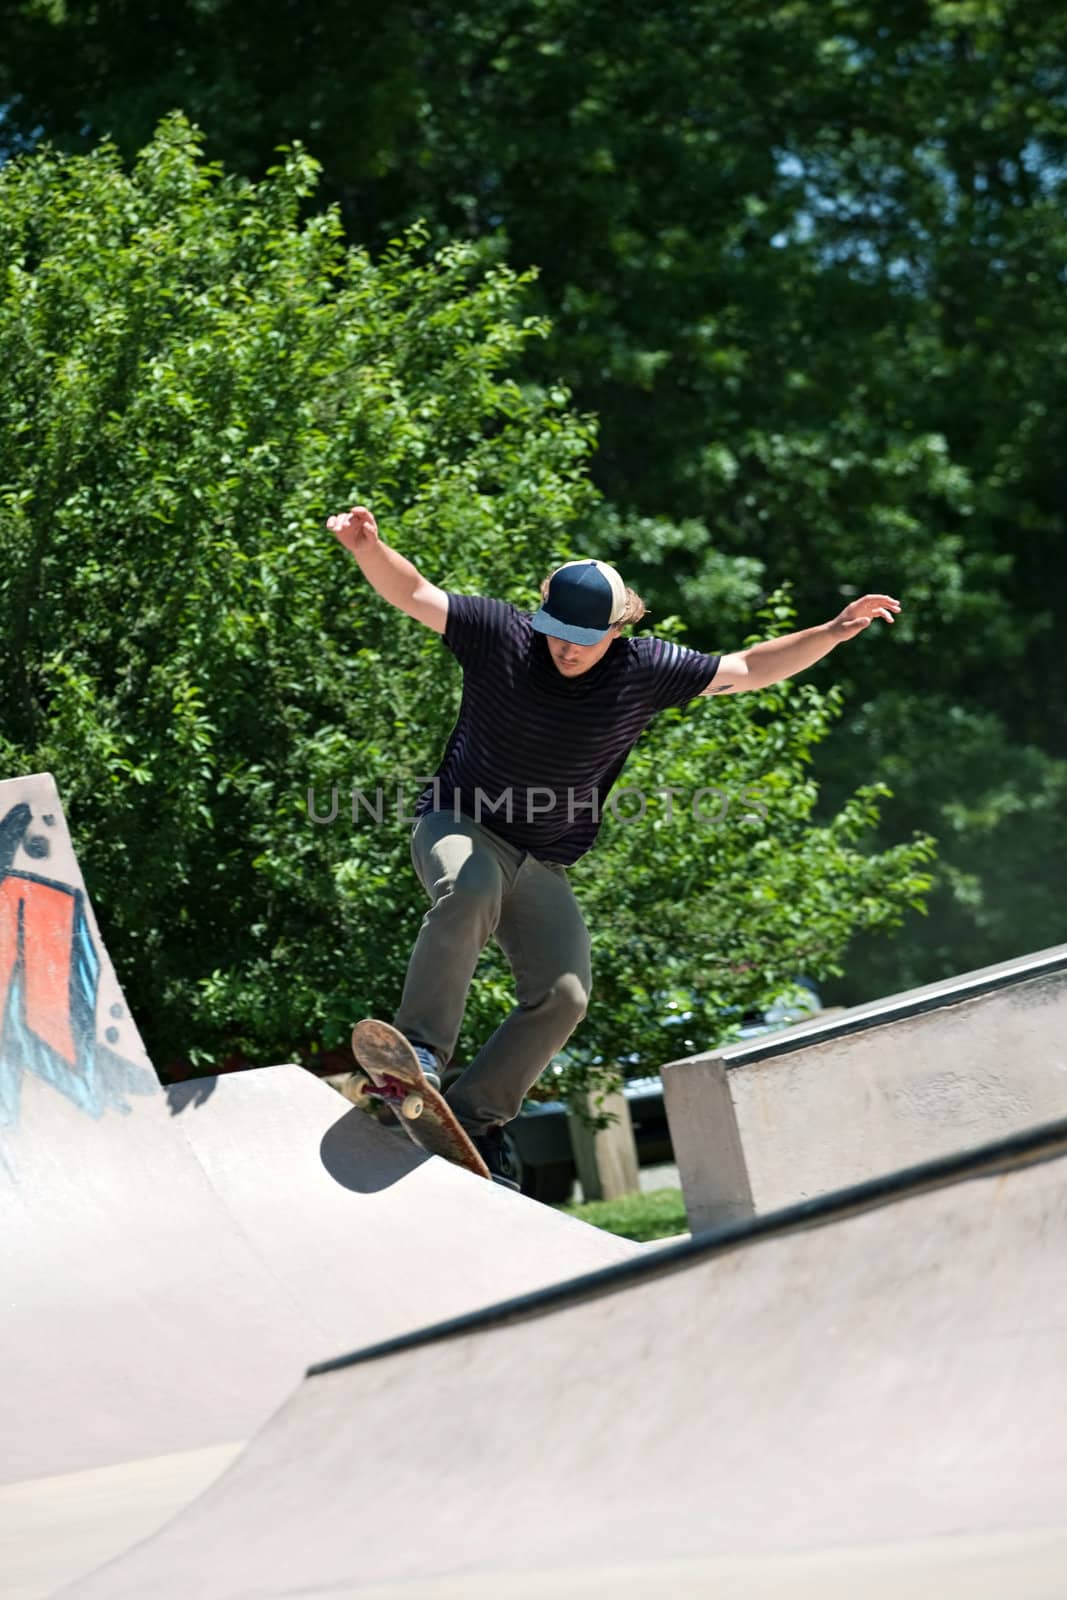 Skateboarder Riding Up a Concrete Skate Ramp by graficallyminded